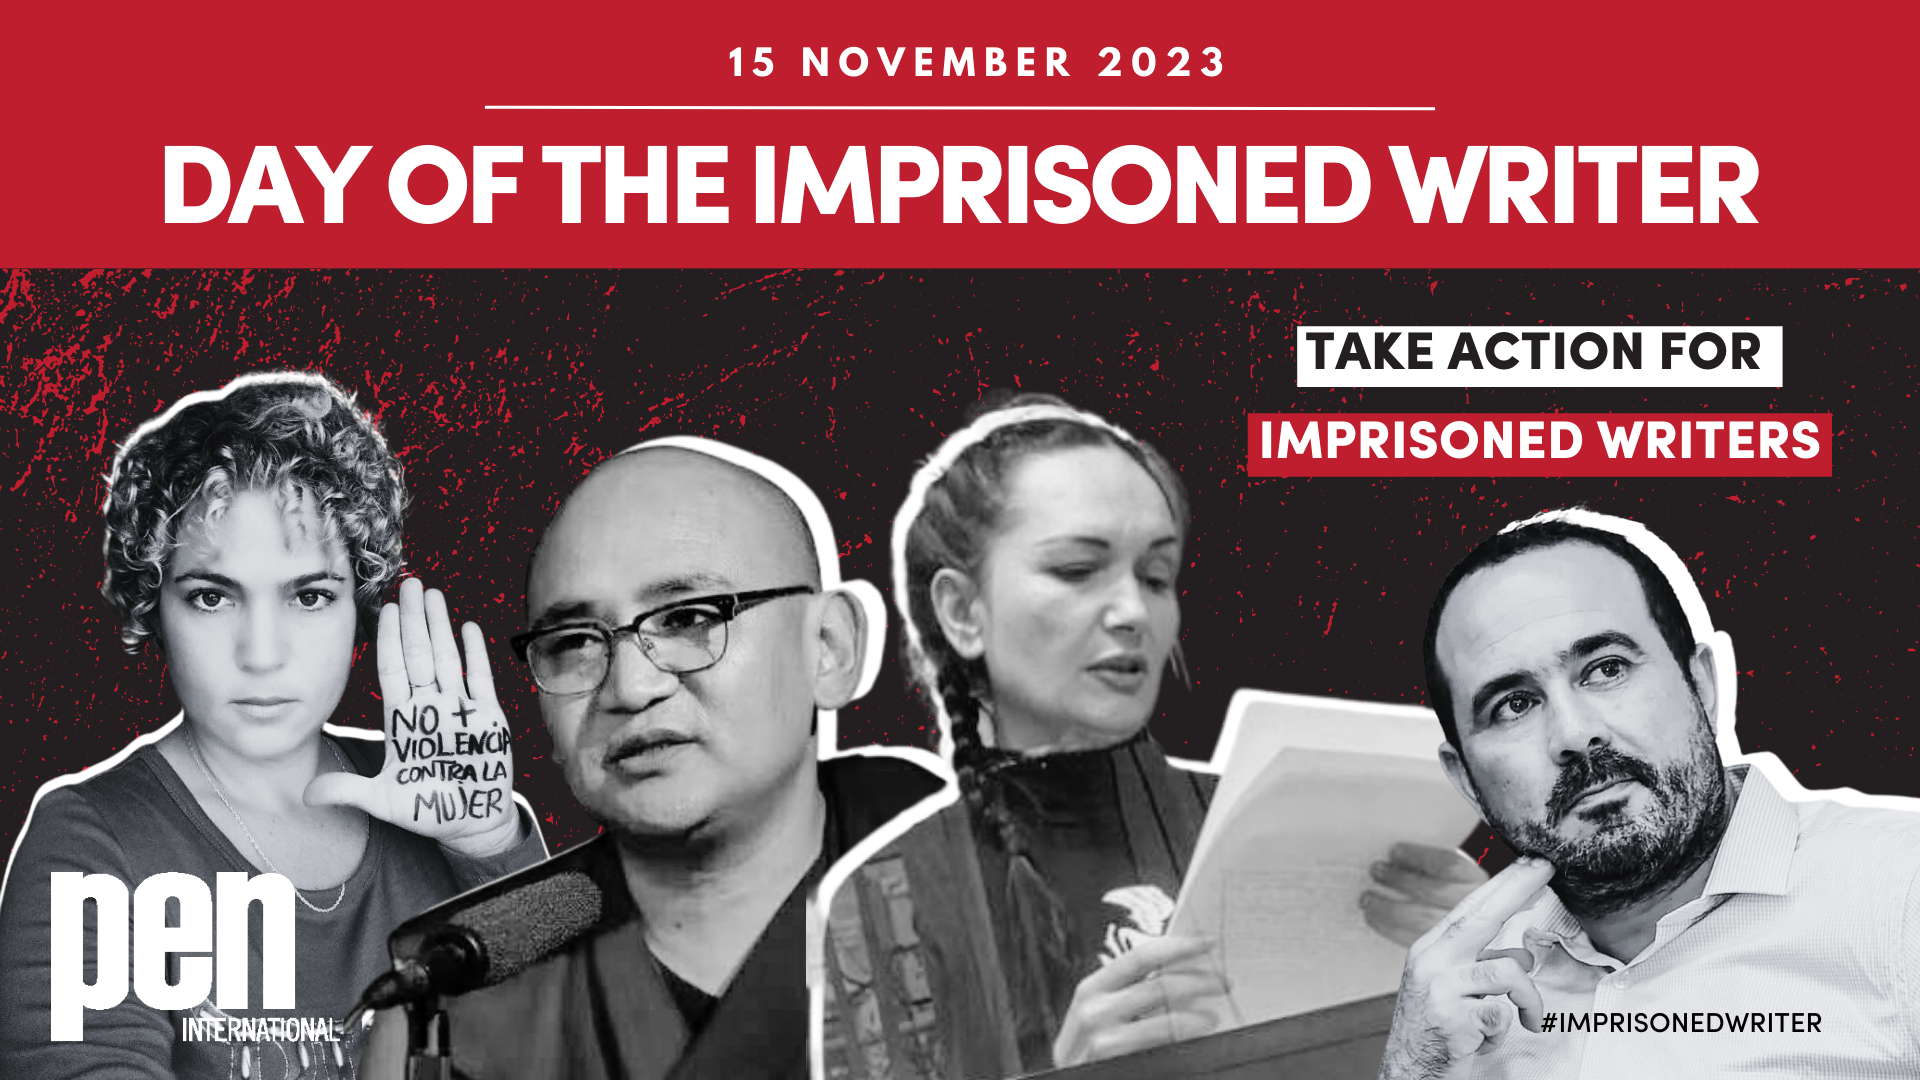 A photo of th four authors supported by the Day of the Imprisoned Writer Campaign